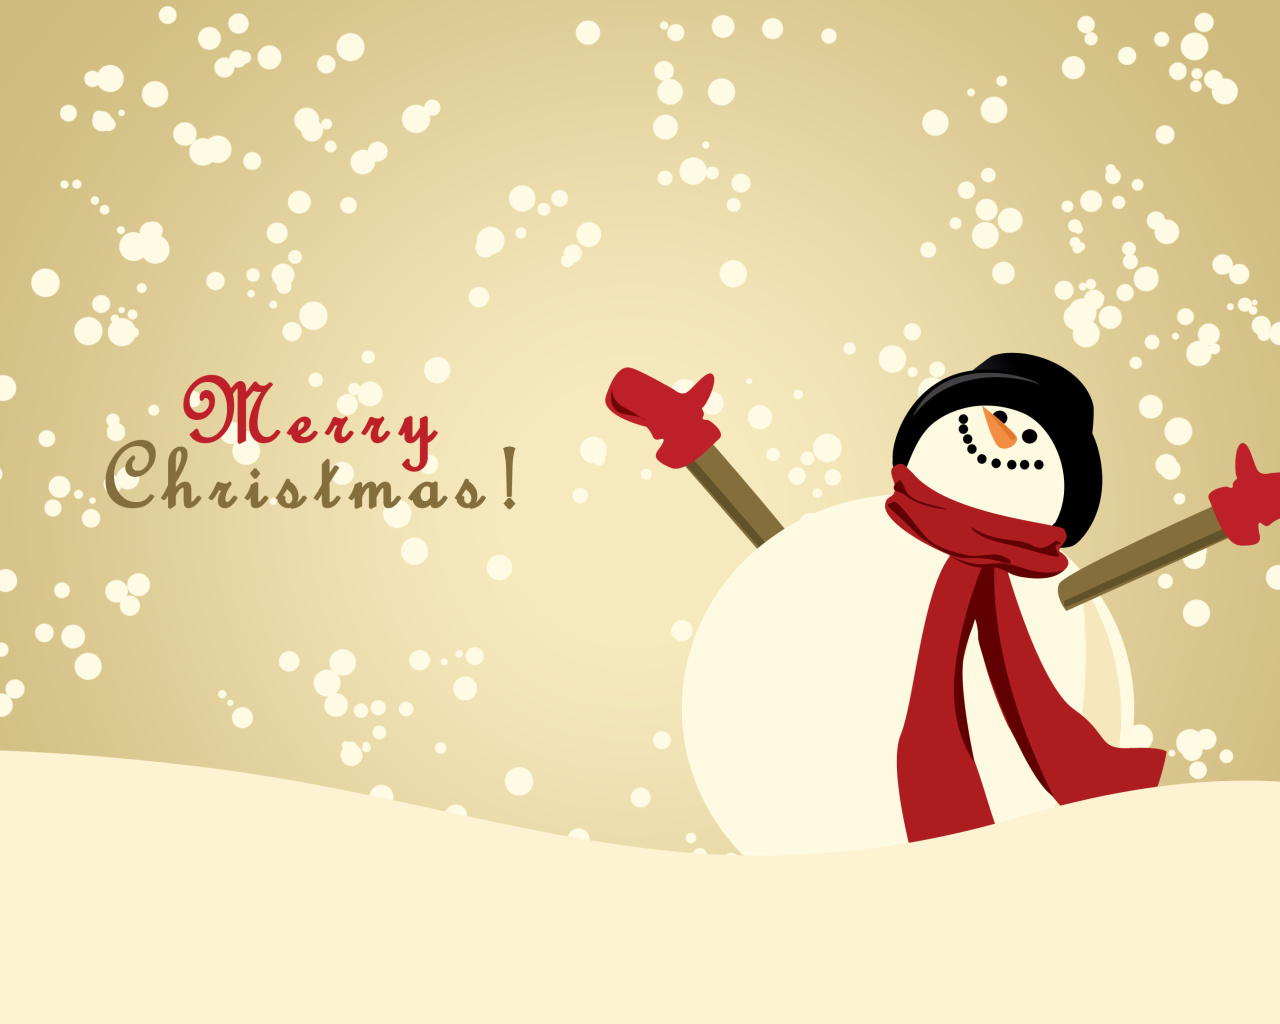 Merry Christmas Wishes from Snowman wallpaper 1280x1024